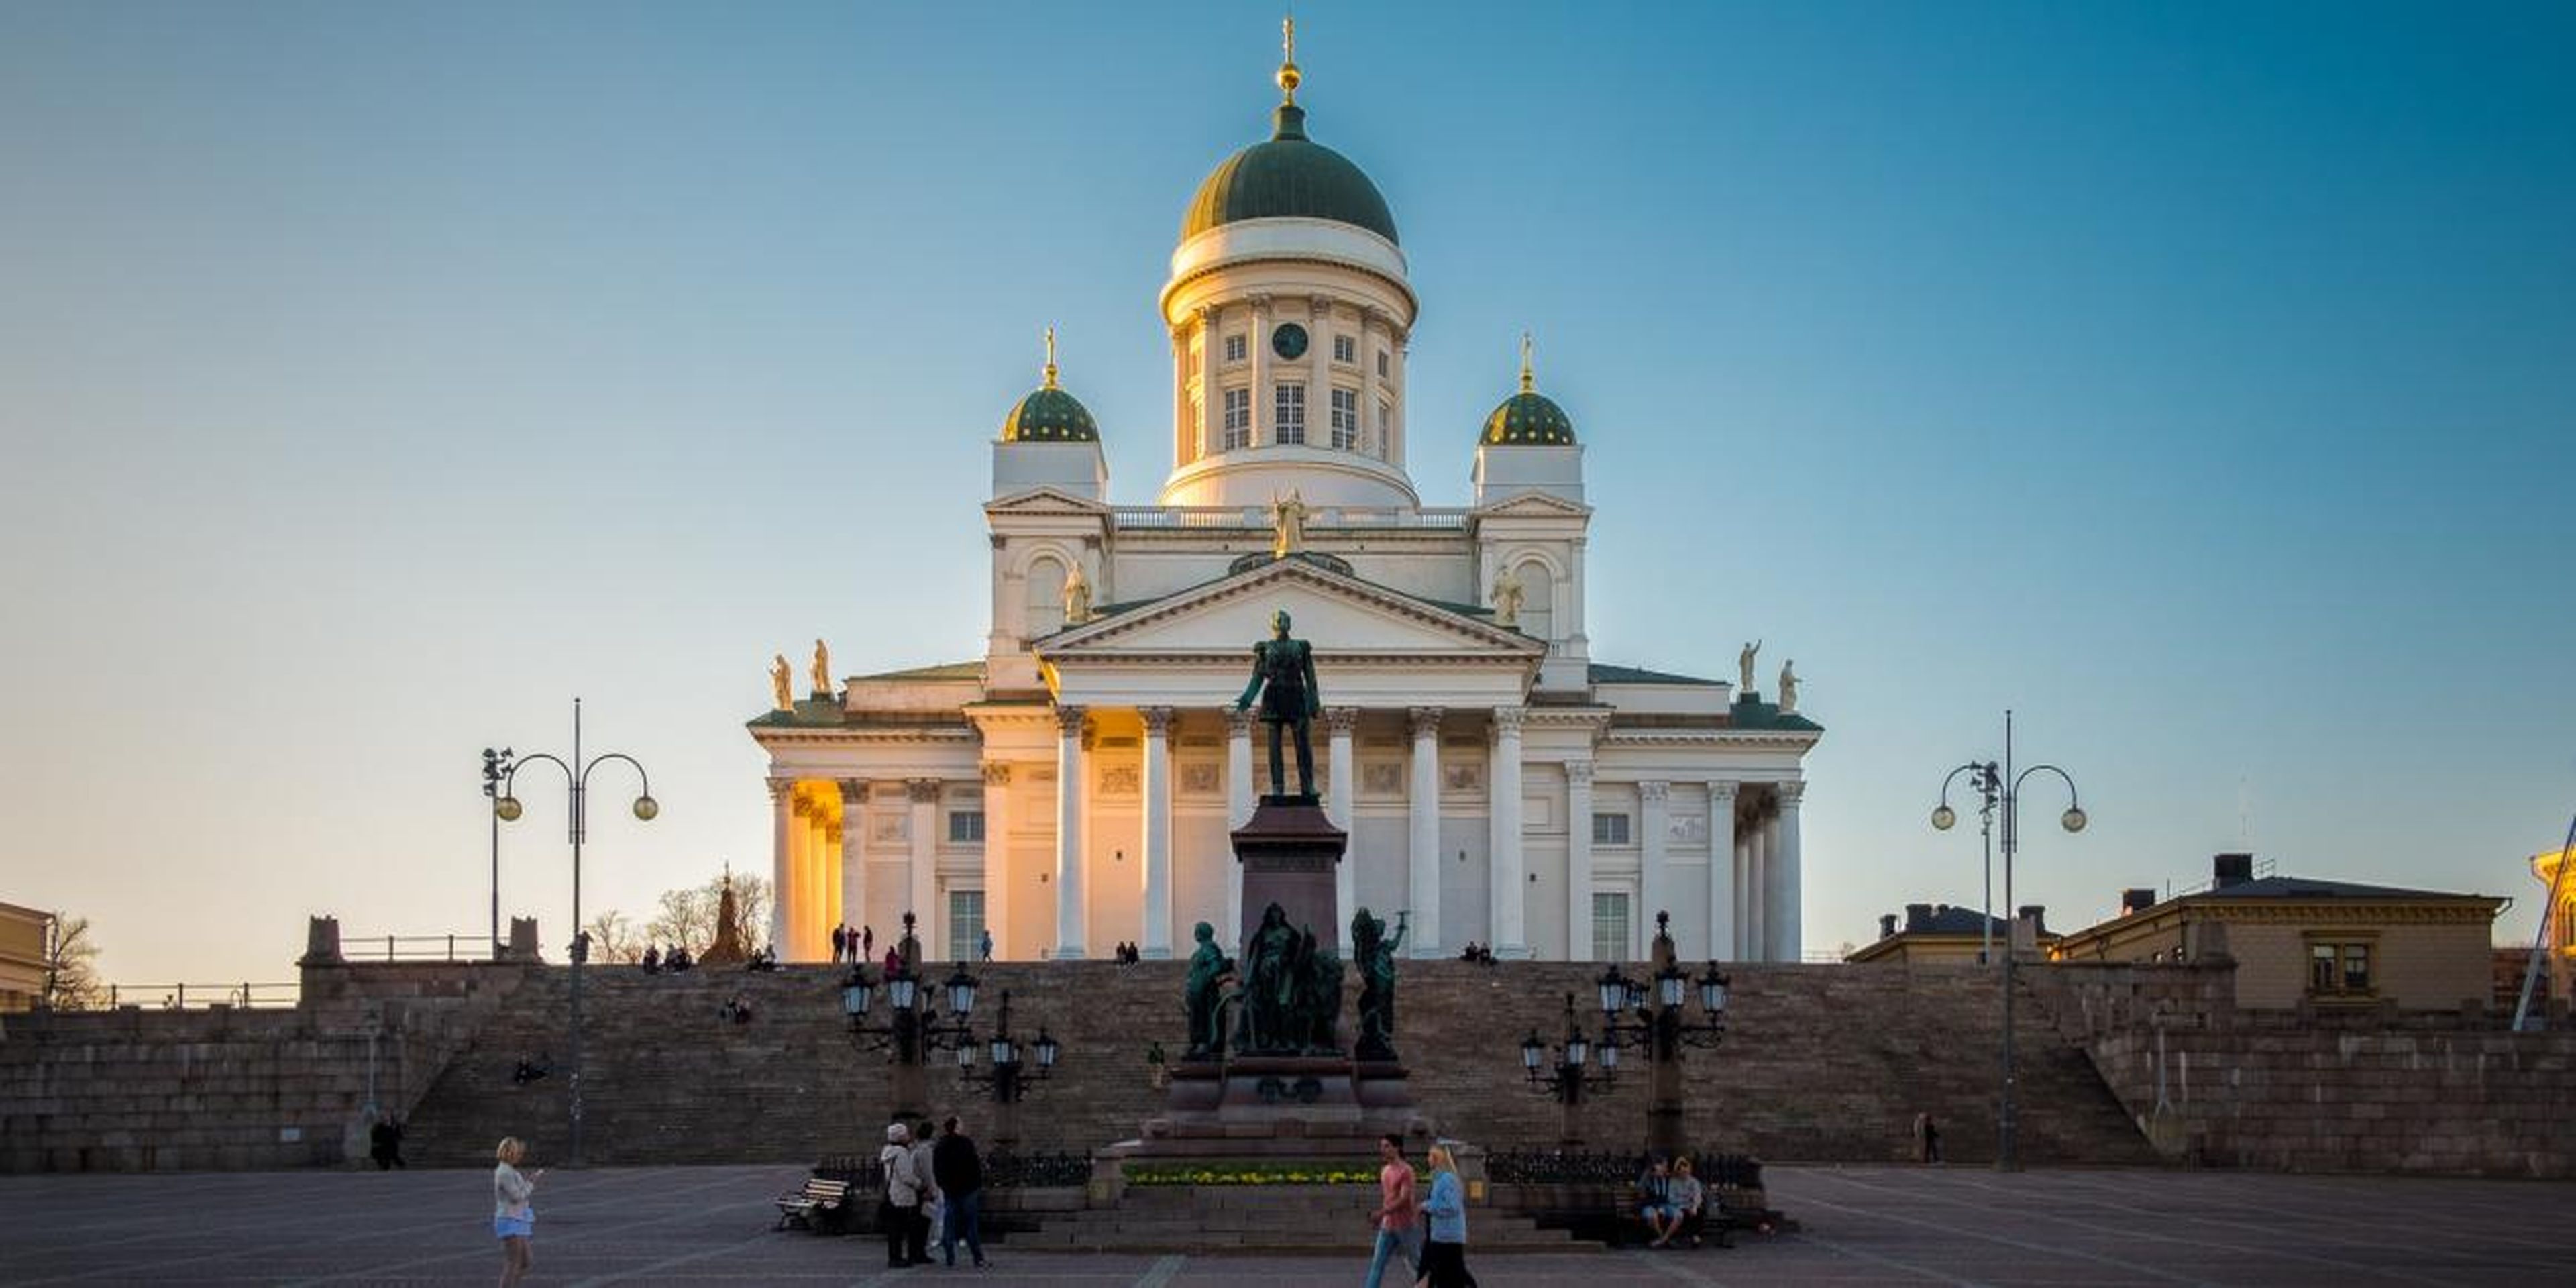 Helsinki Cathedral, FInland.